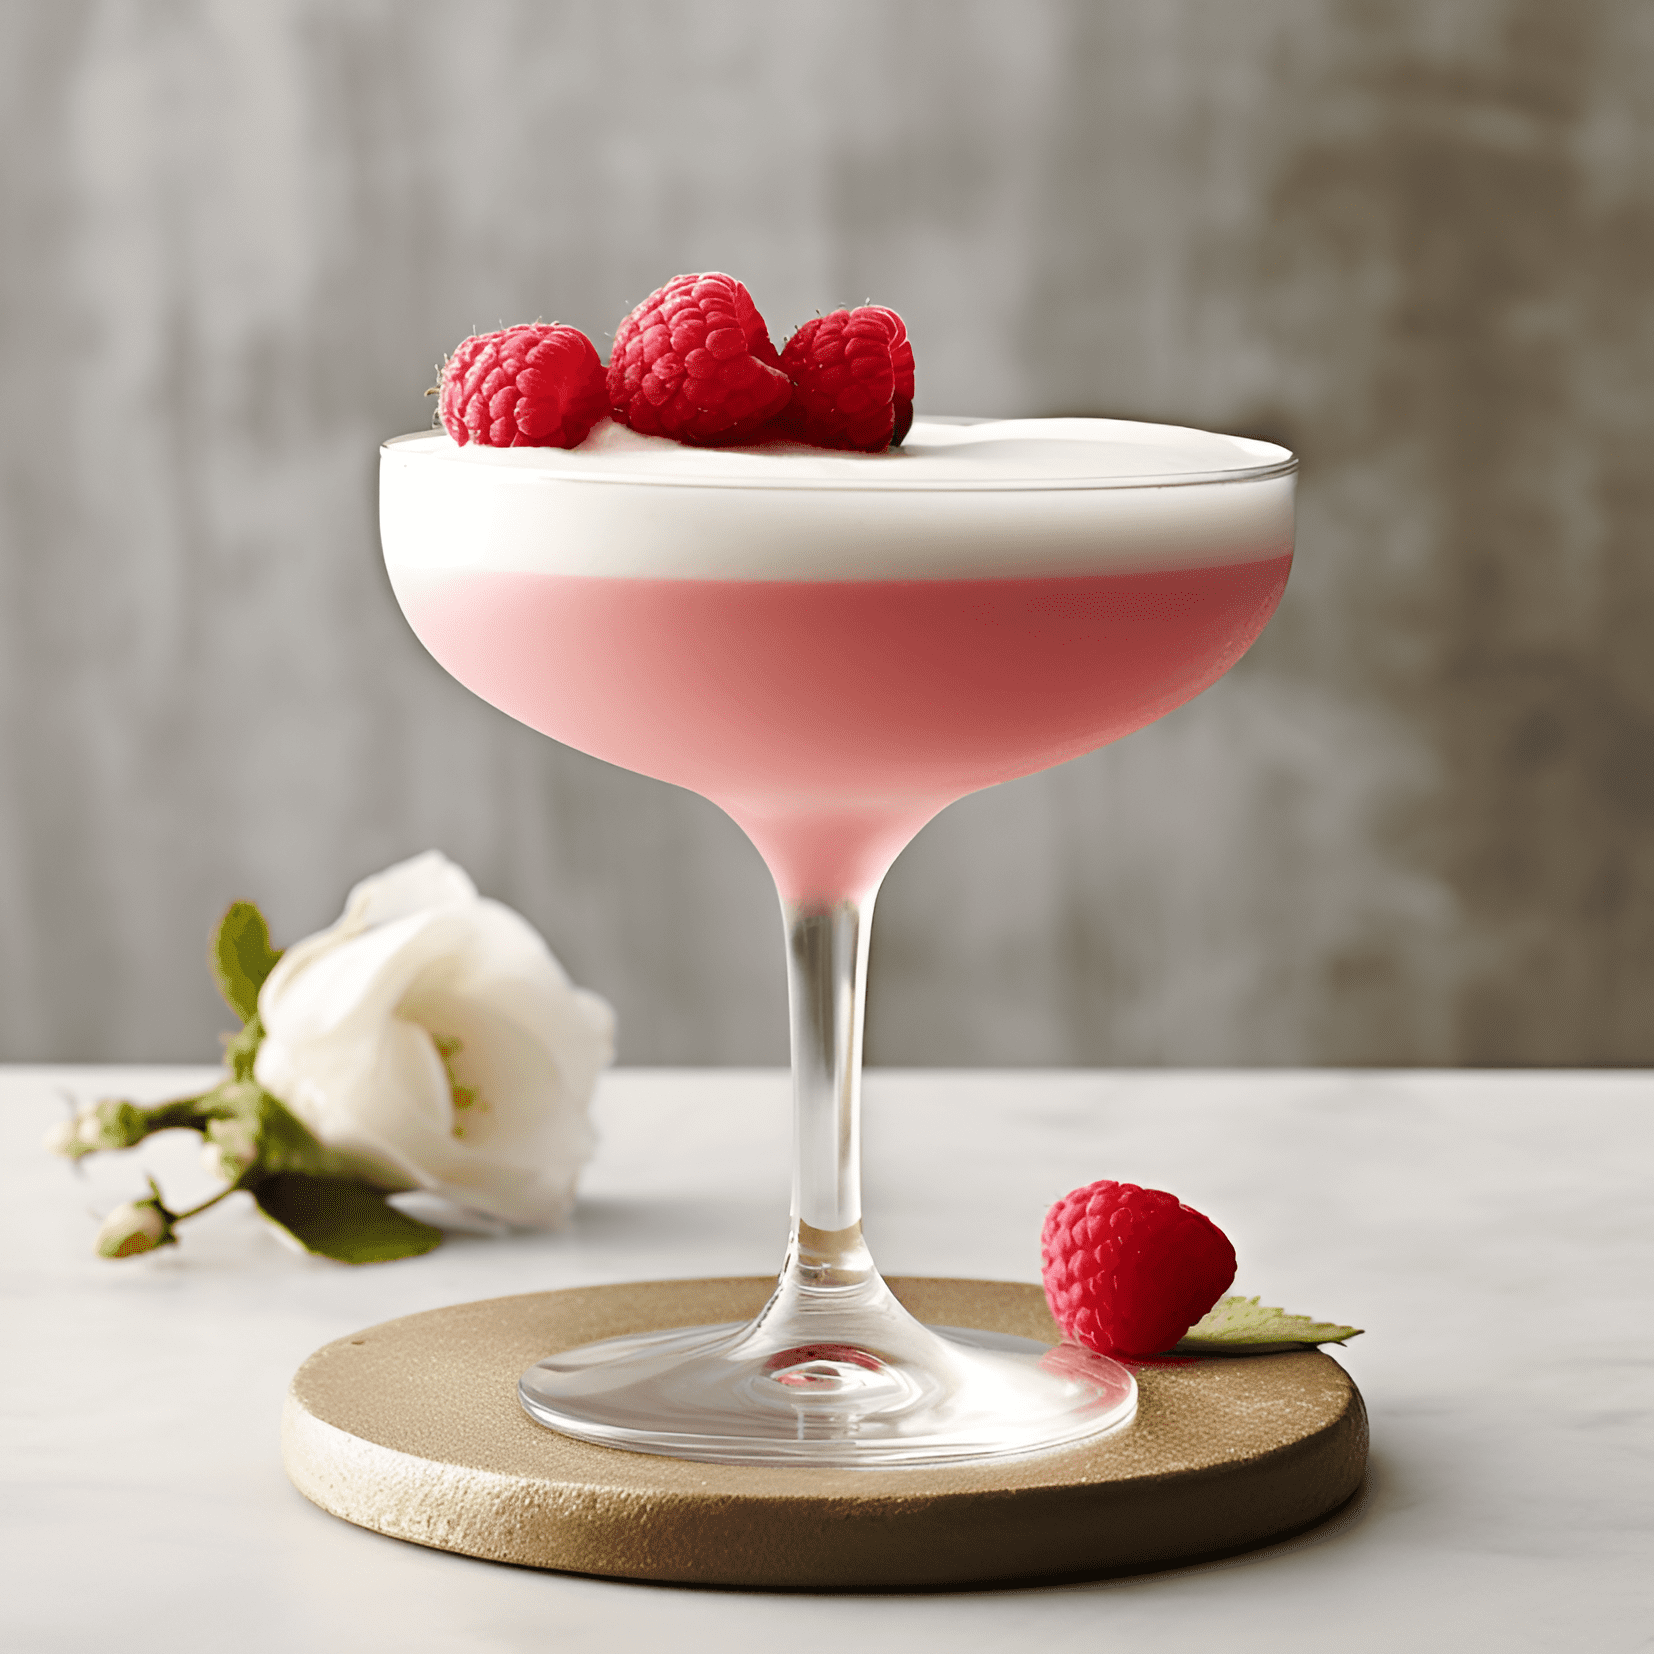 Clover Club Cocktail Recipe - The Clover Club cocktail has a delightful balance of sweet, sour, and fruity flavors. The raspberry syrup adds a touch of sweetness, while the lemon juice provides a refreshing tang. The gin imparts a subtle herbal note, and the egg white creates a smooth, frothy texture.